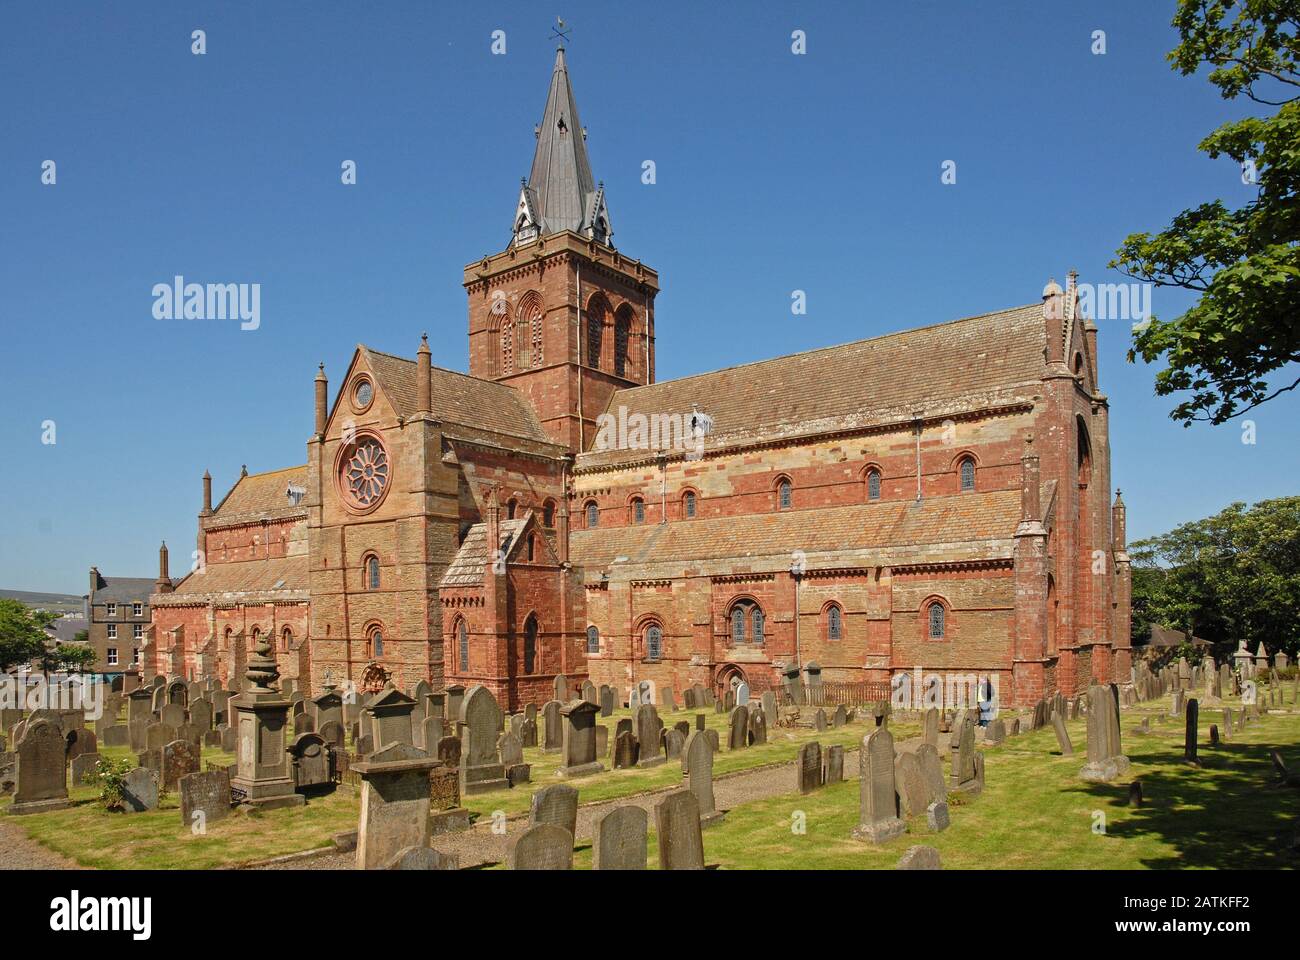 ST MAGNUS CATHEDRAL, KIRKWALL, ORKNEY ISLANDS, SCOTLAND Stock Photo